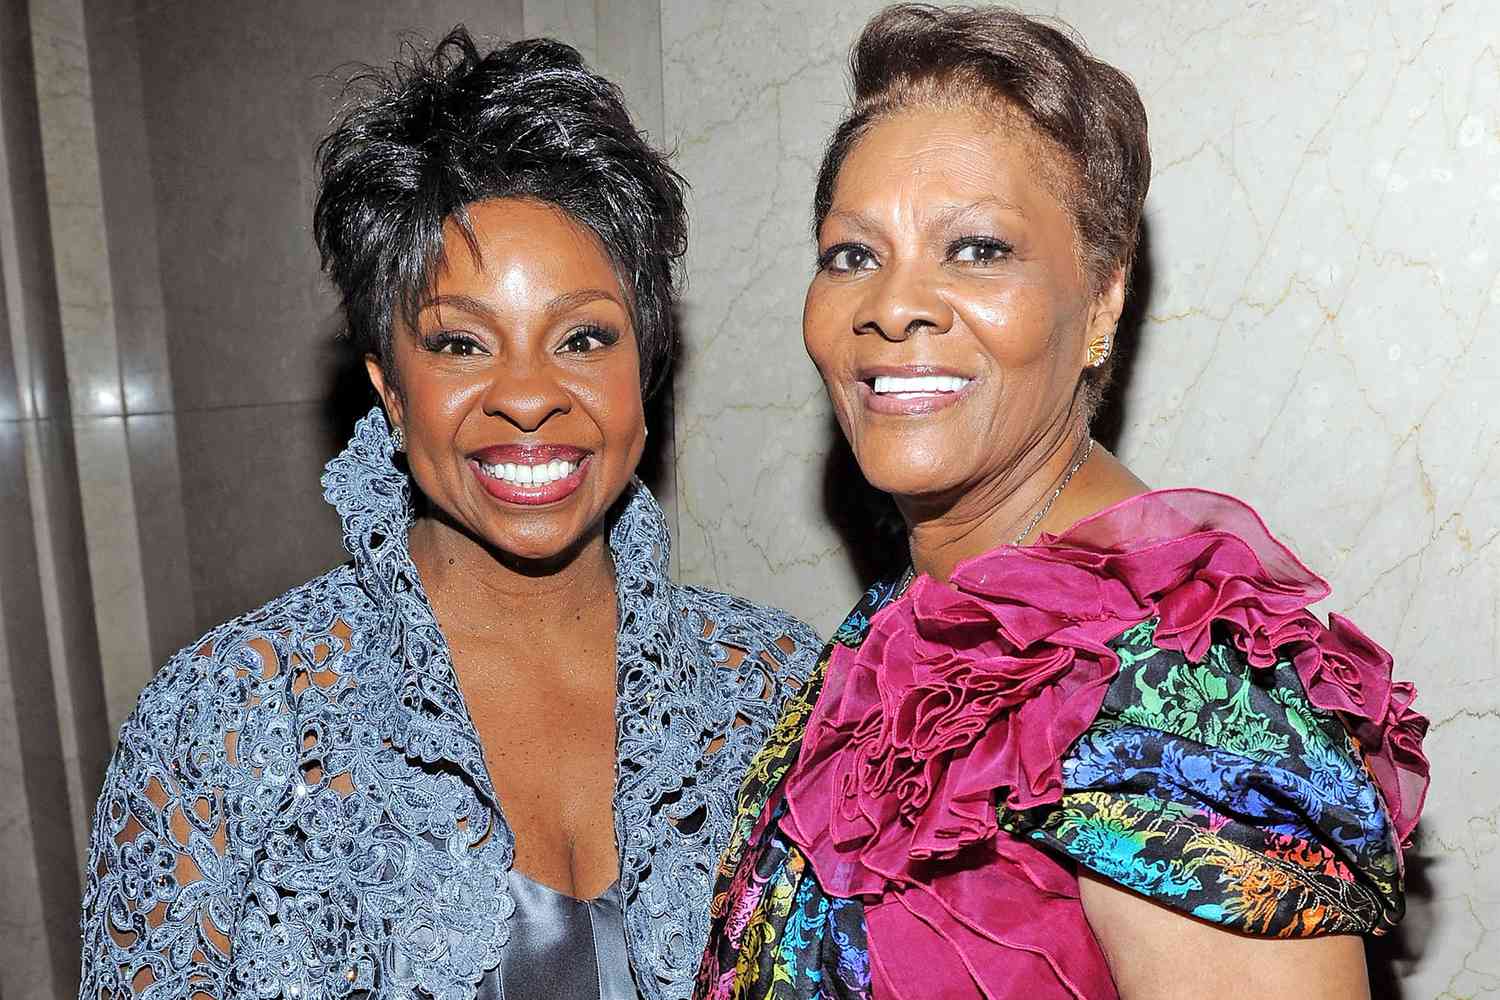 Dionne Warwick and Gladys Knight react to being mistaken for each other by tennis commentator